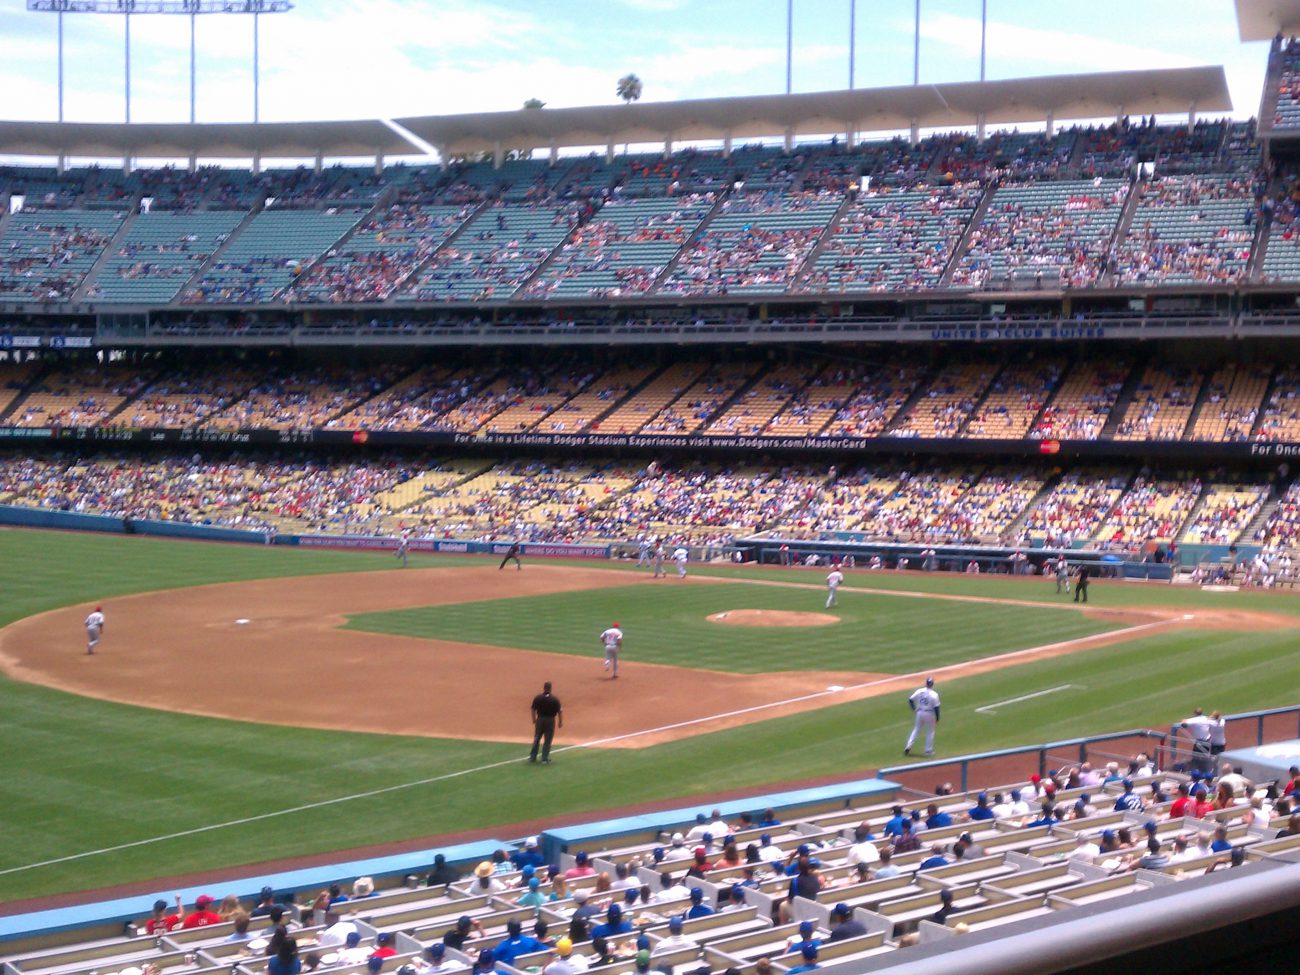 What are the important Dodger Stadium rules?